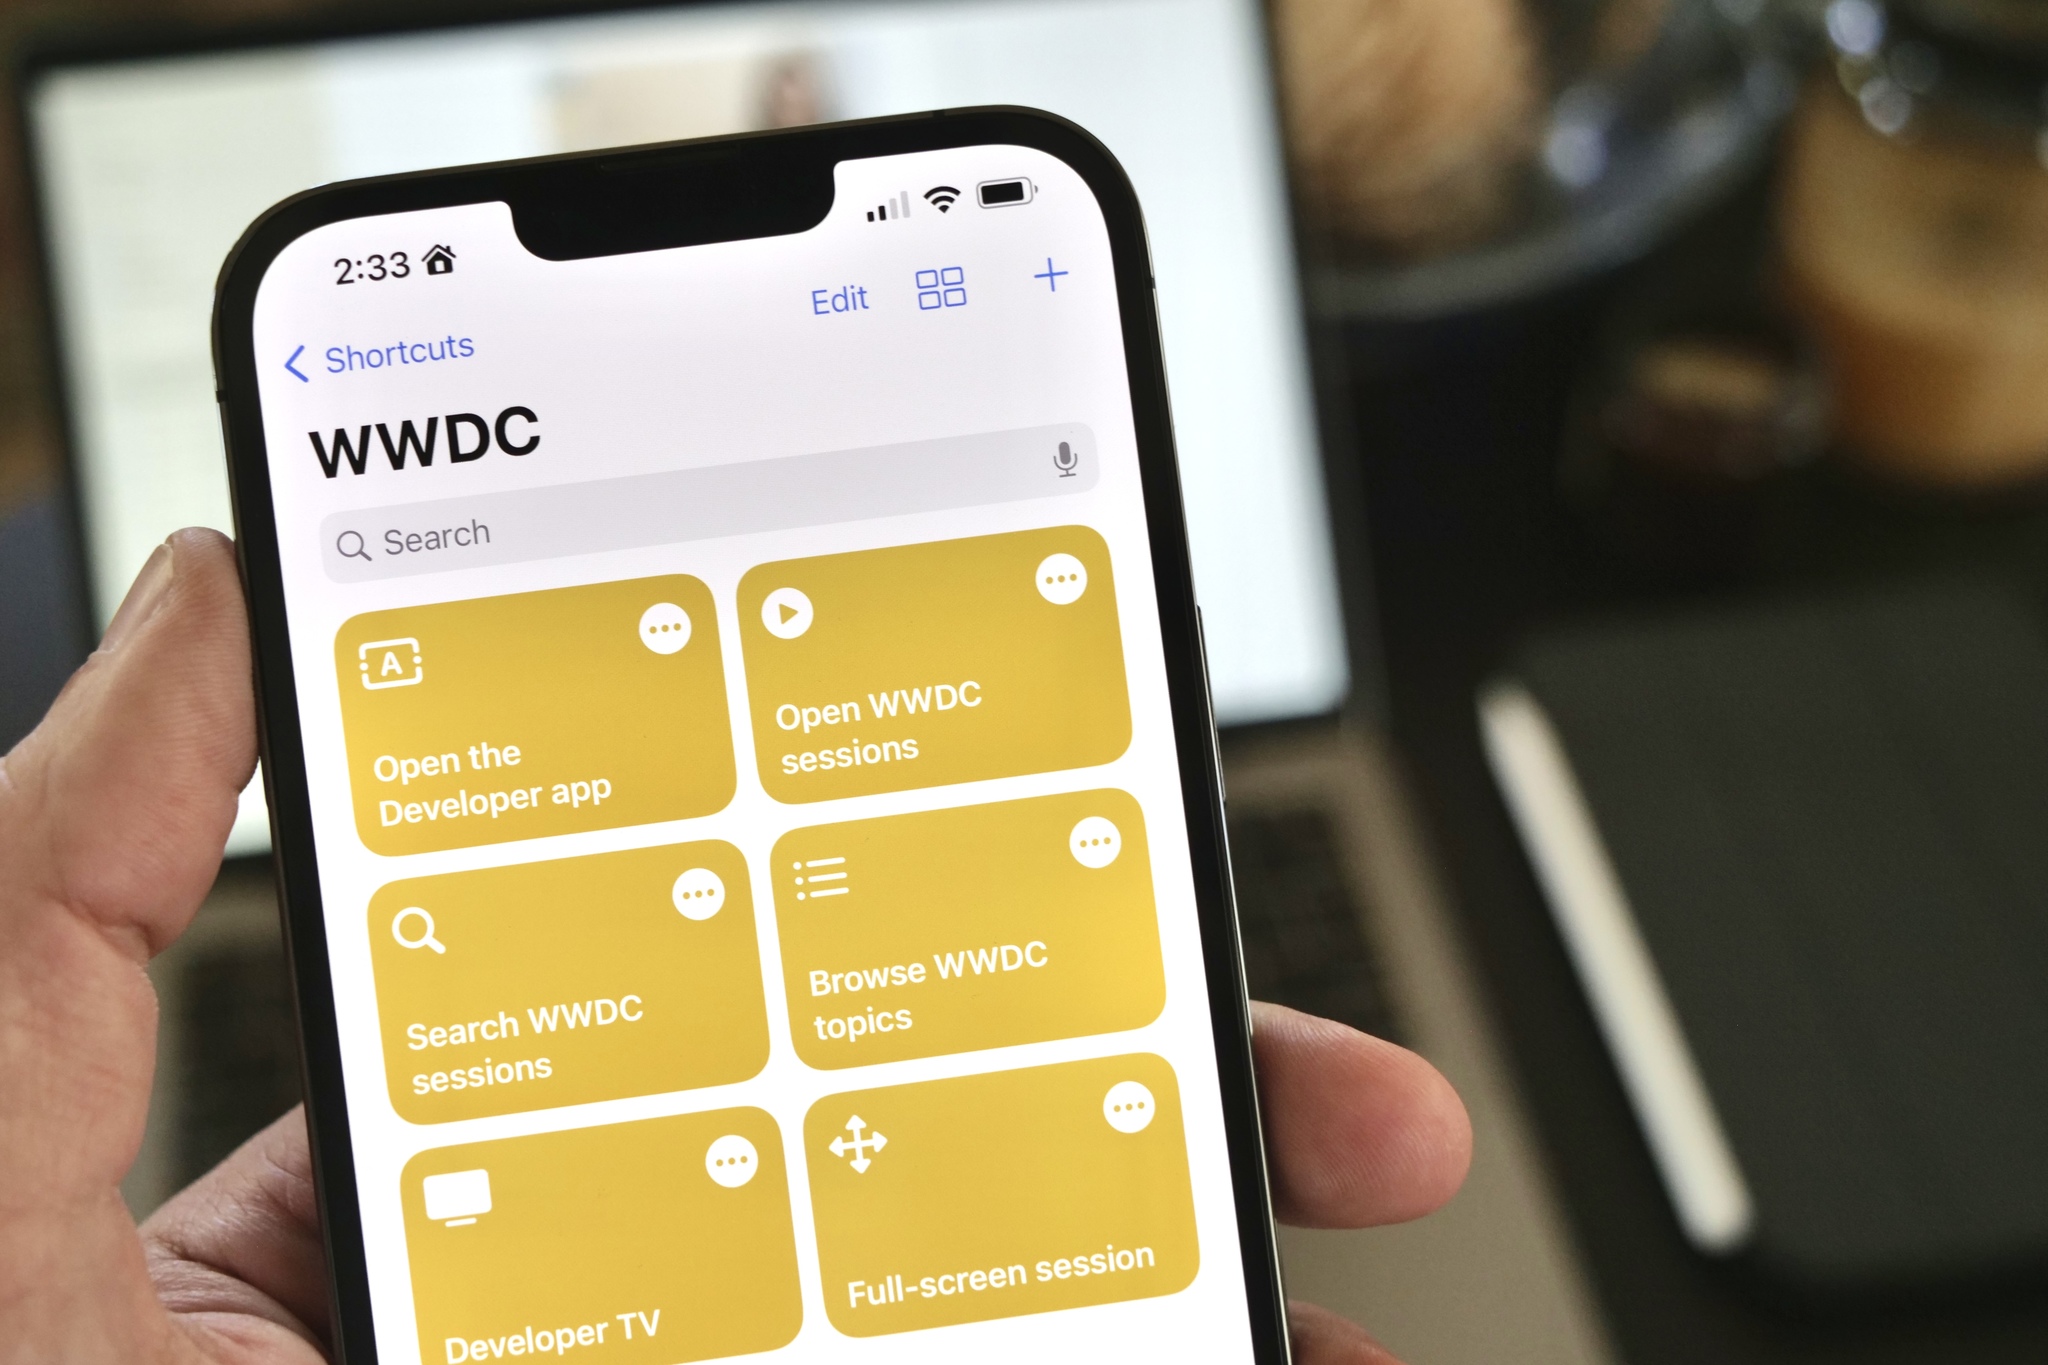 7 Shortcuts to help you take notes on WWDC sessions